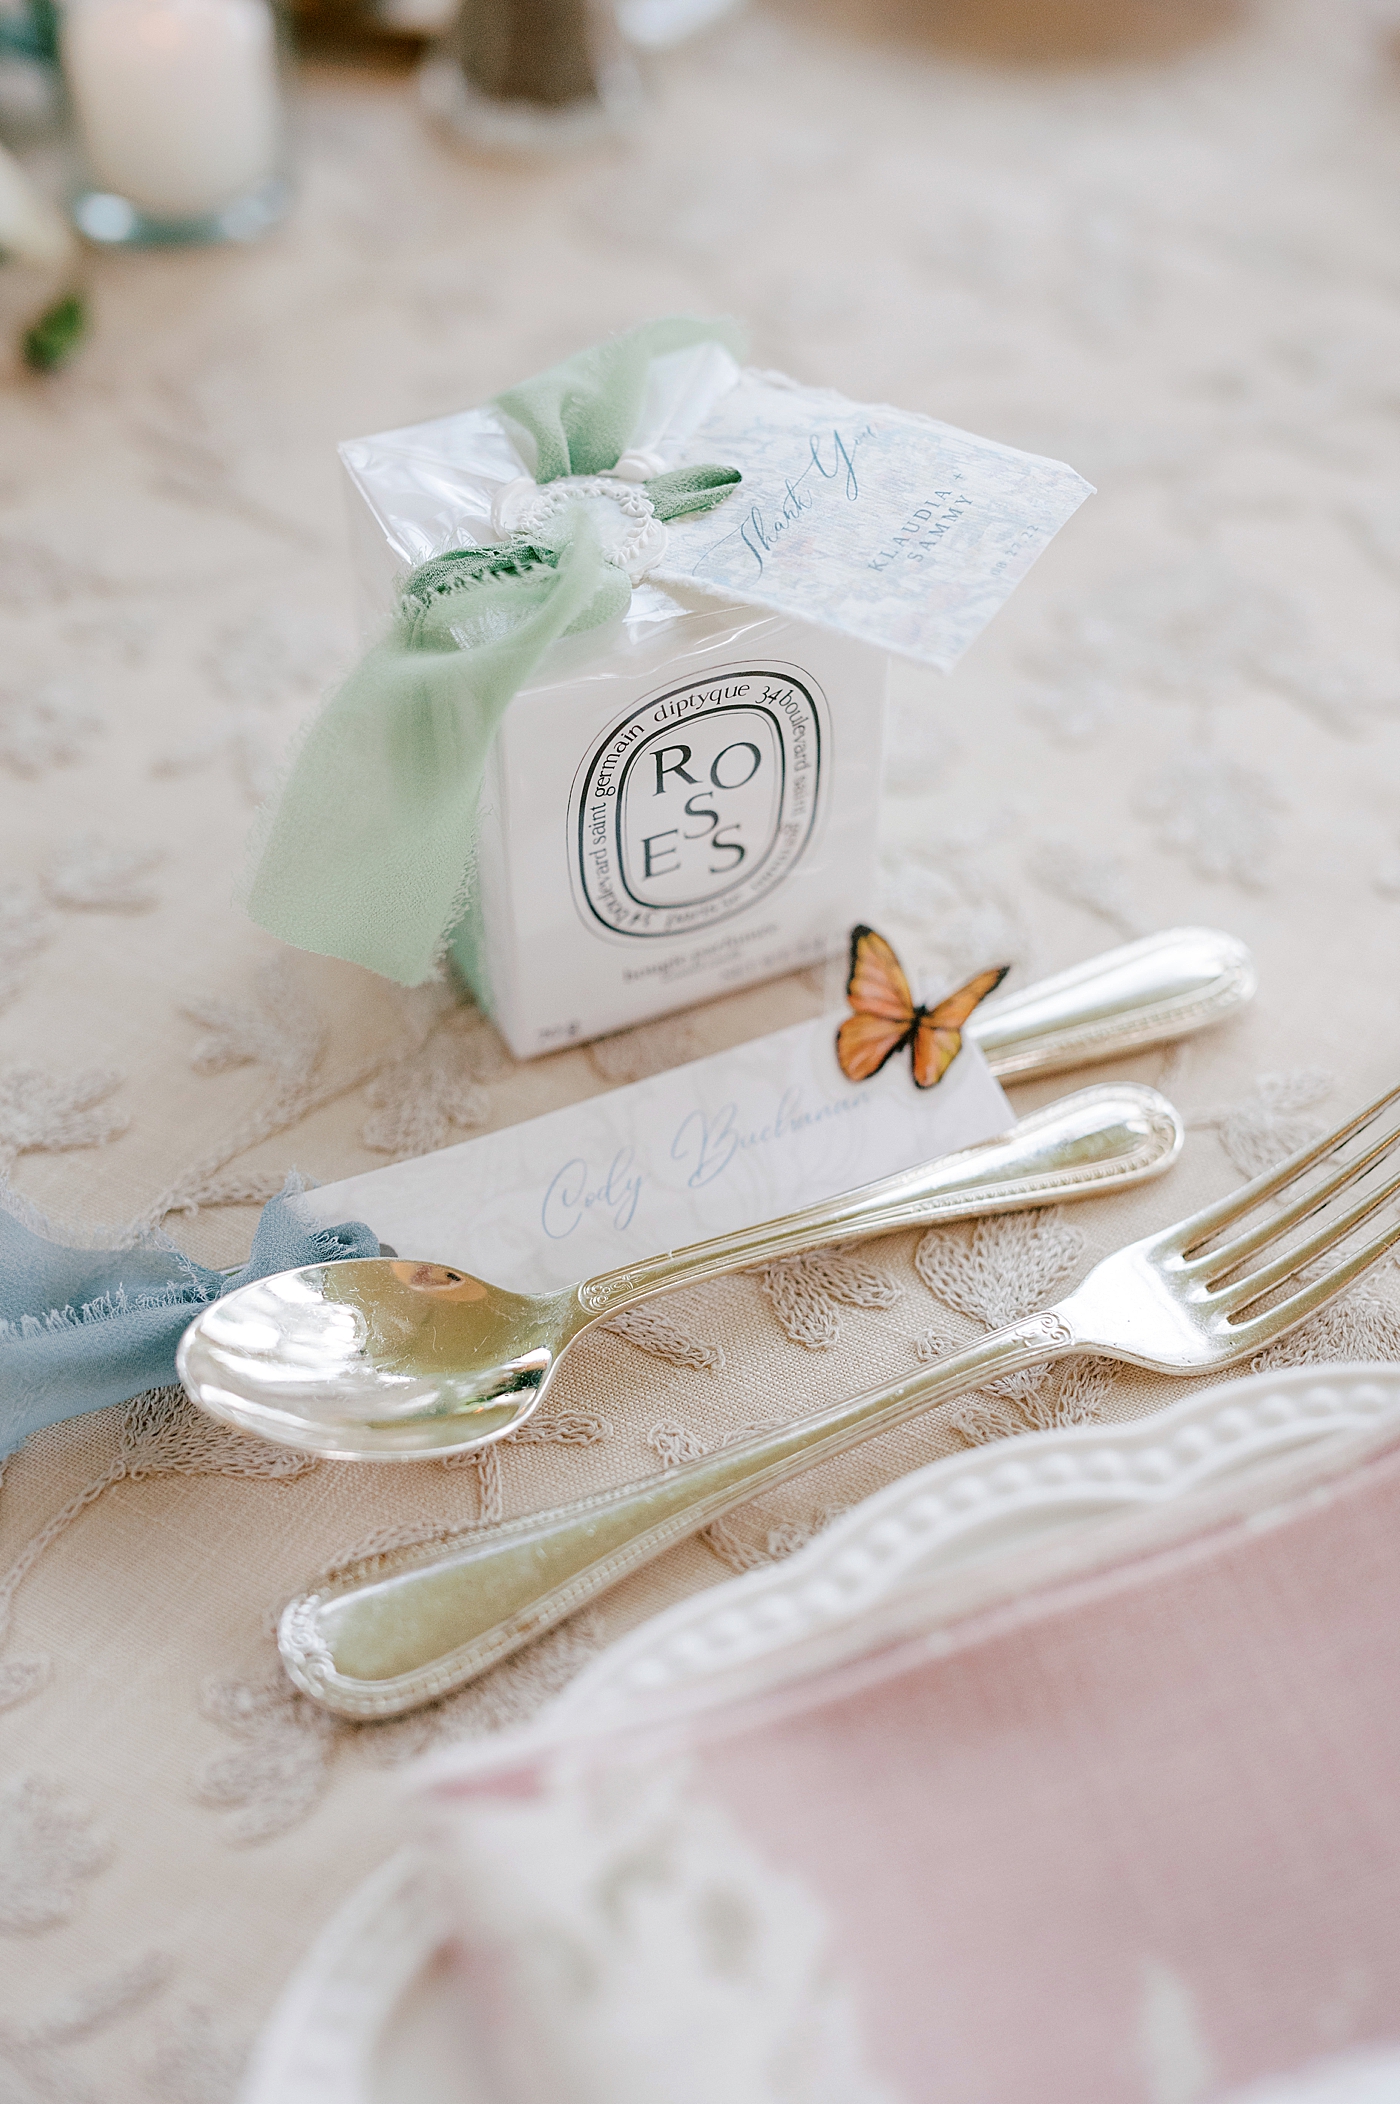 Silverware and candles wedding gift | Image by Hope Helmuth Photography